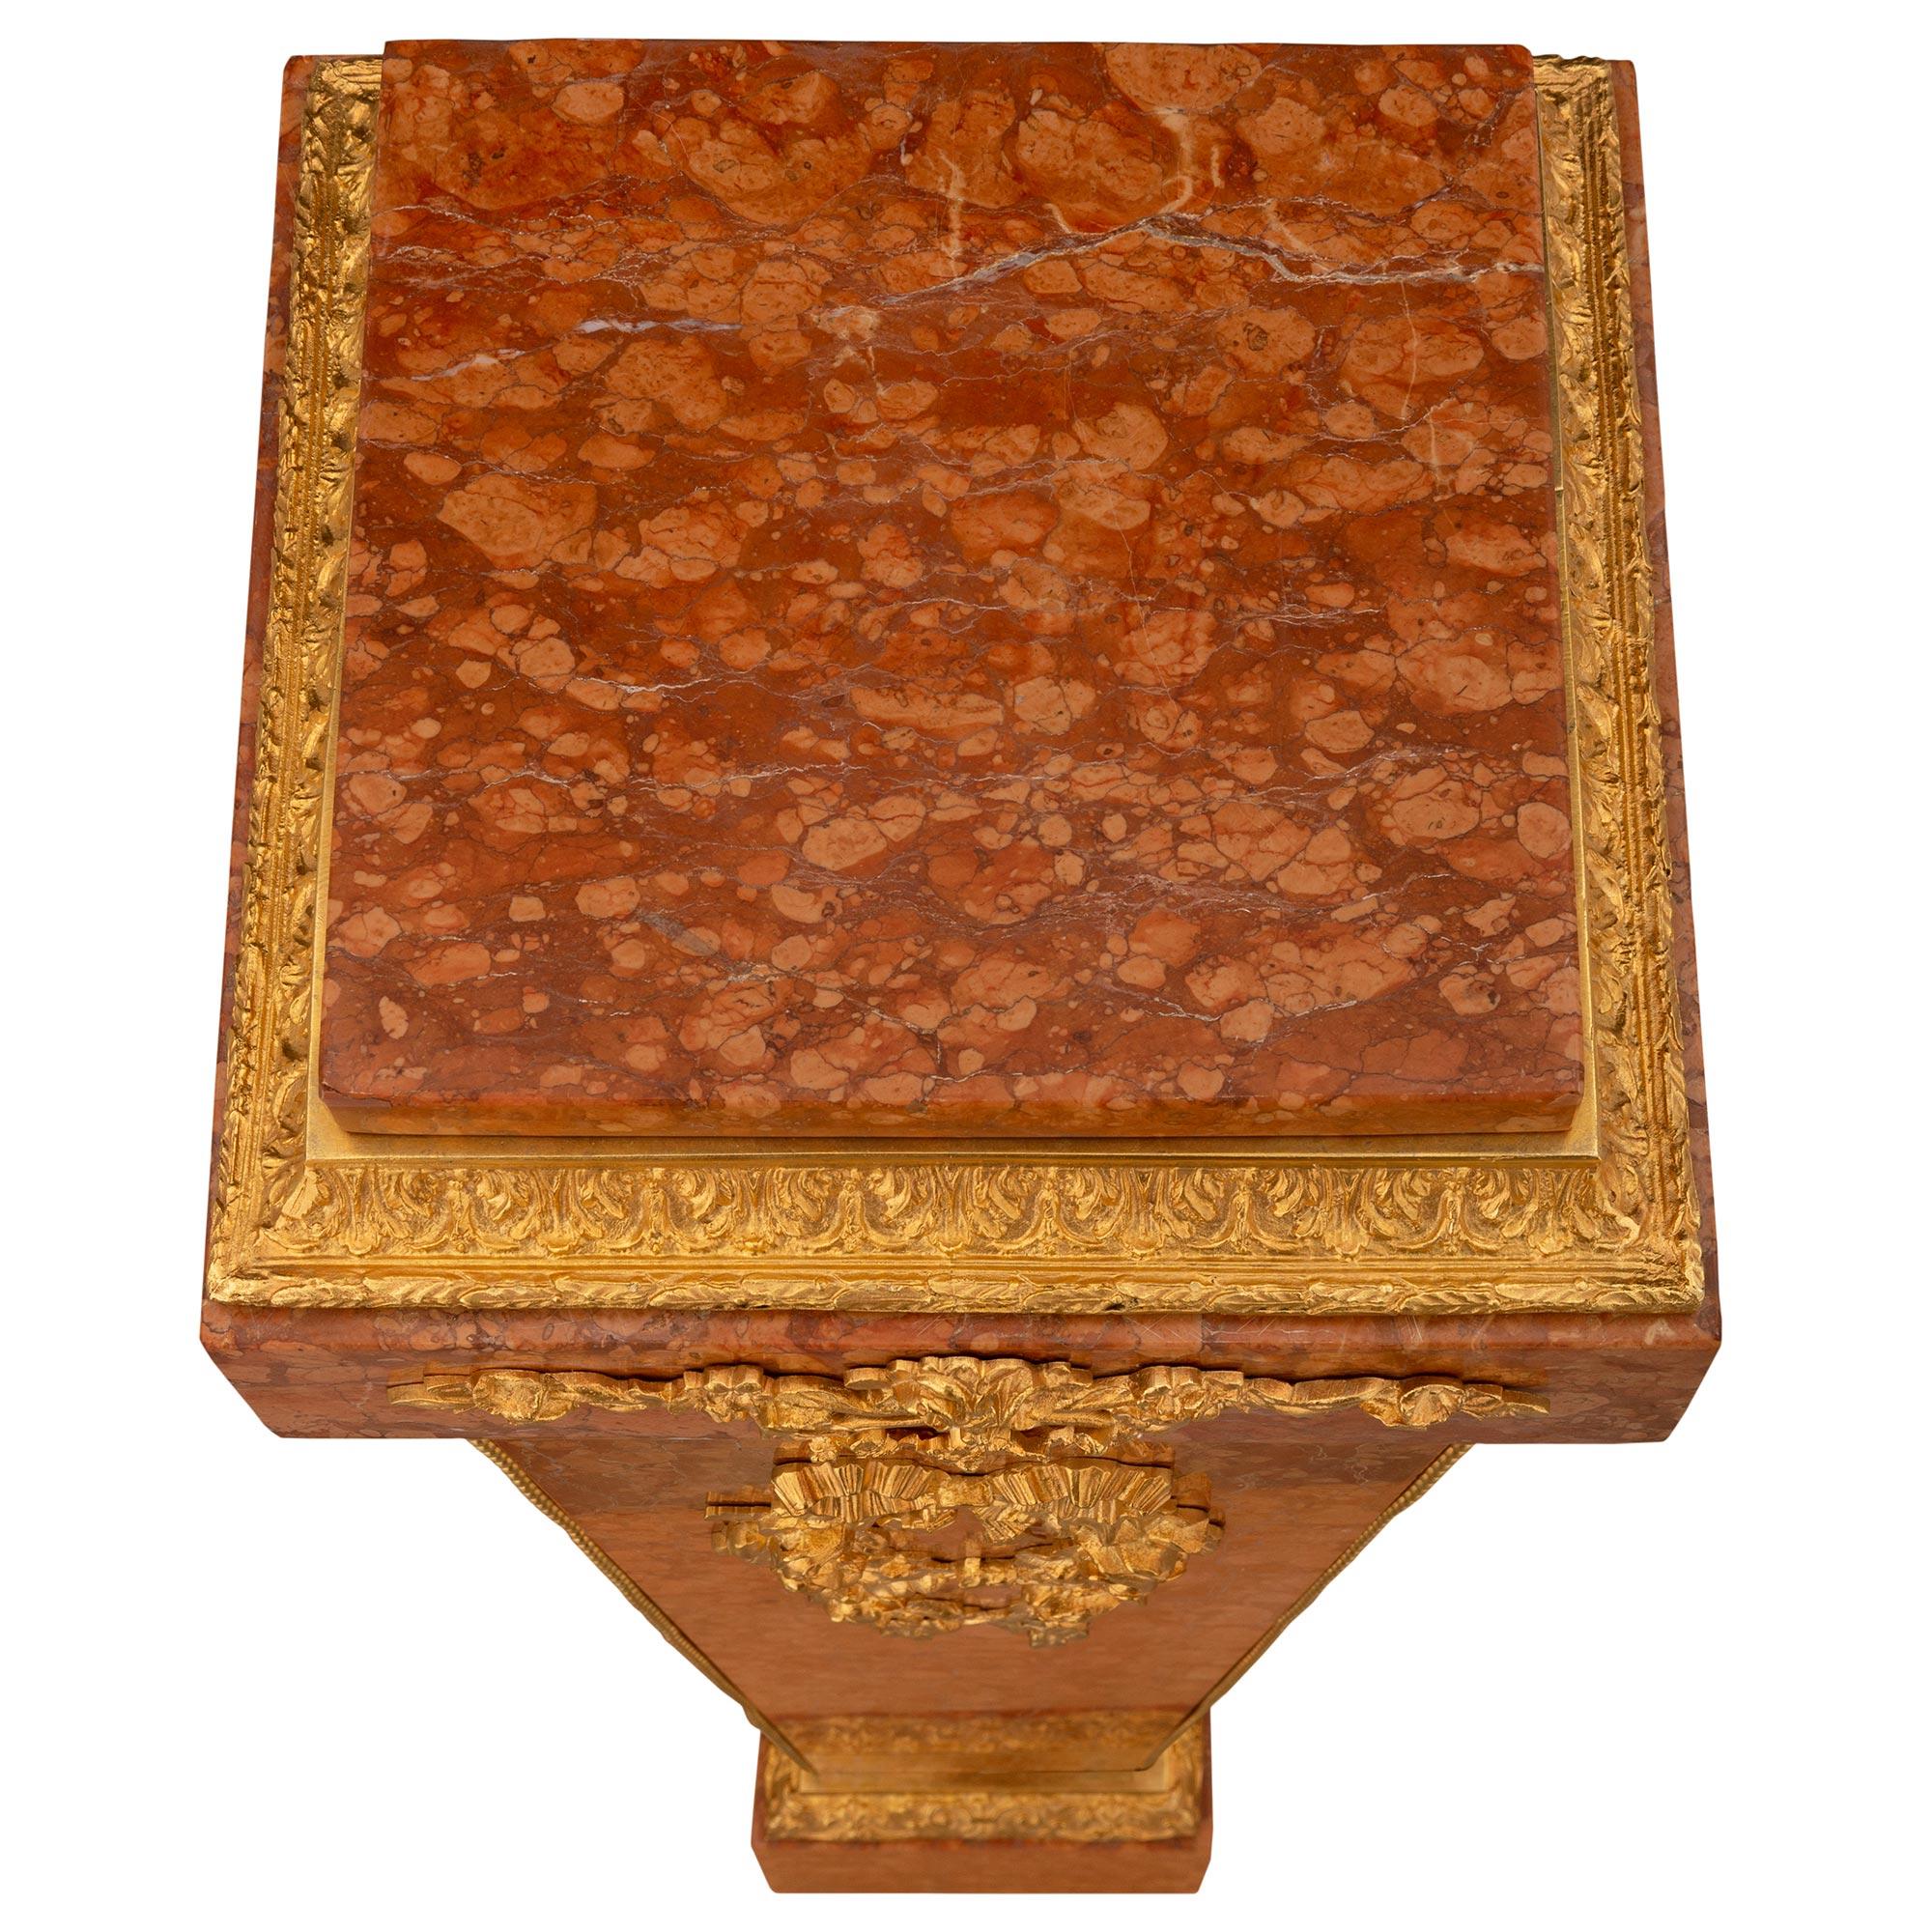 An exceptional French 19th century Louis XVI st. Rouge Griotte, Campan Rubané, Brèche de Sicile marble, Granite and ormolu pedestal column. The column is raised by a square Brèche de Sicile marble base with a beautiful richly chased mottled foliate